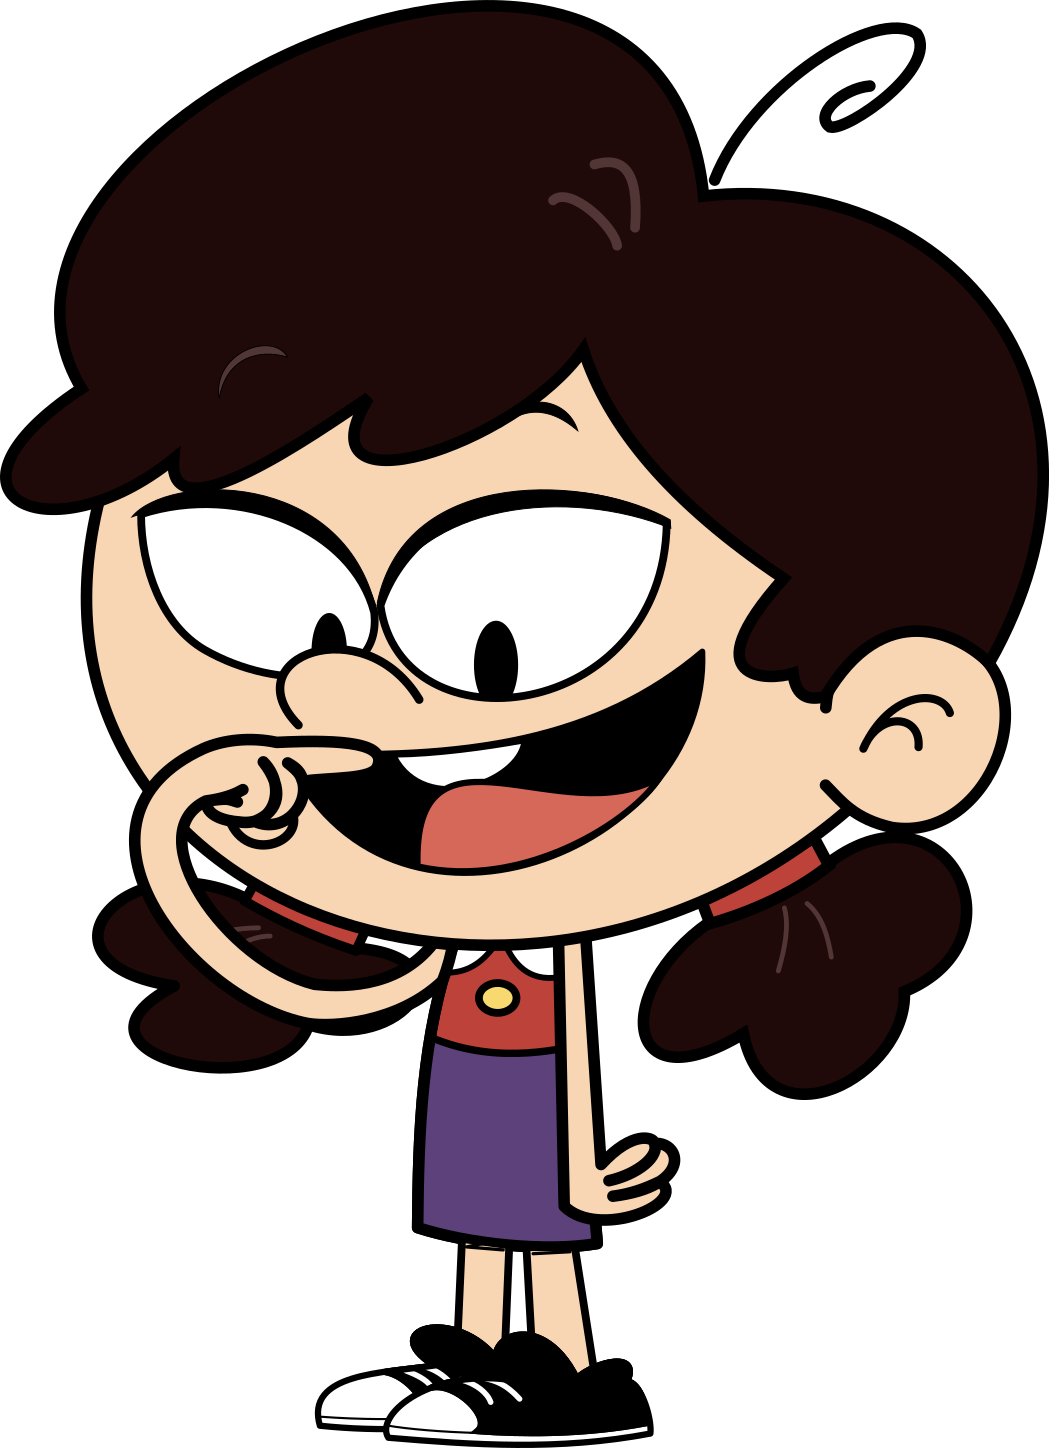 Adelaide Chang's Loose Tooth (Requested) by PhillLord on DeviantArt